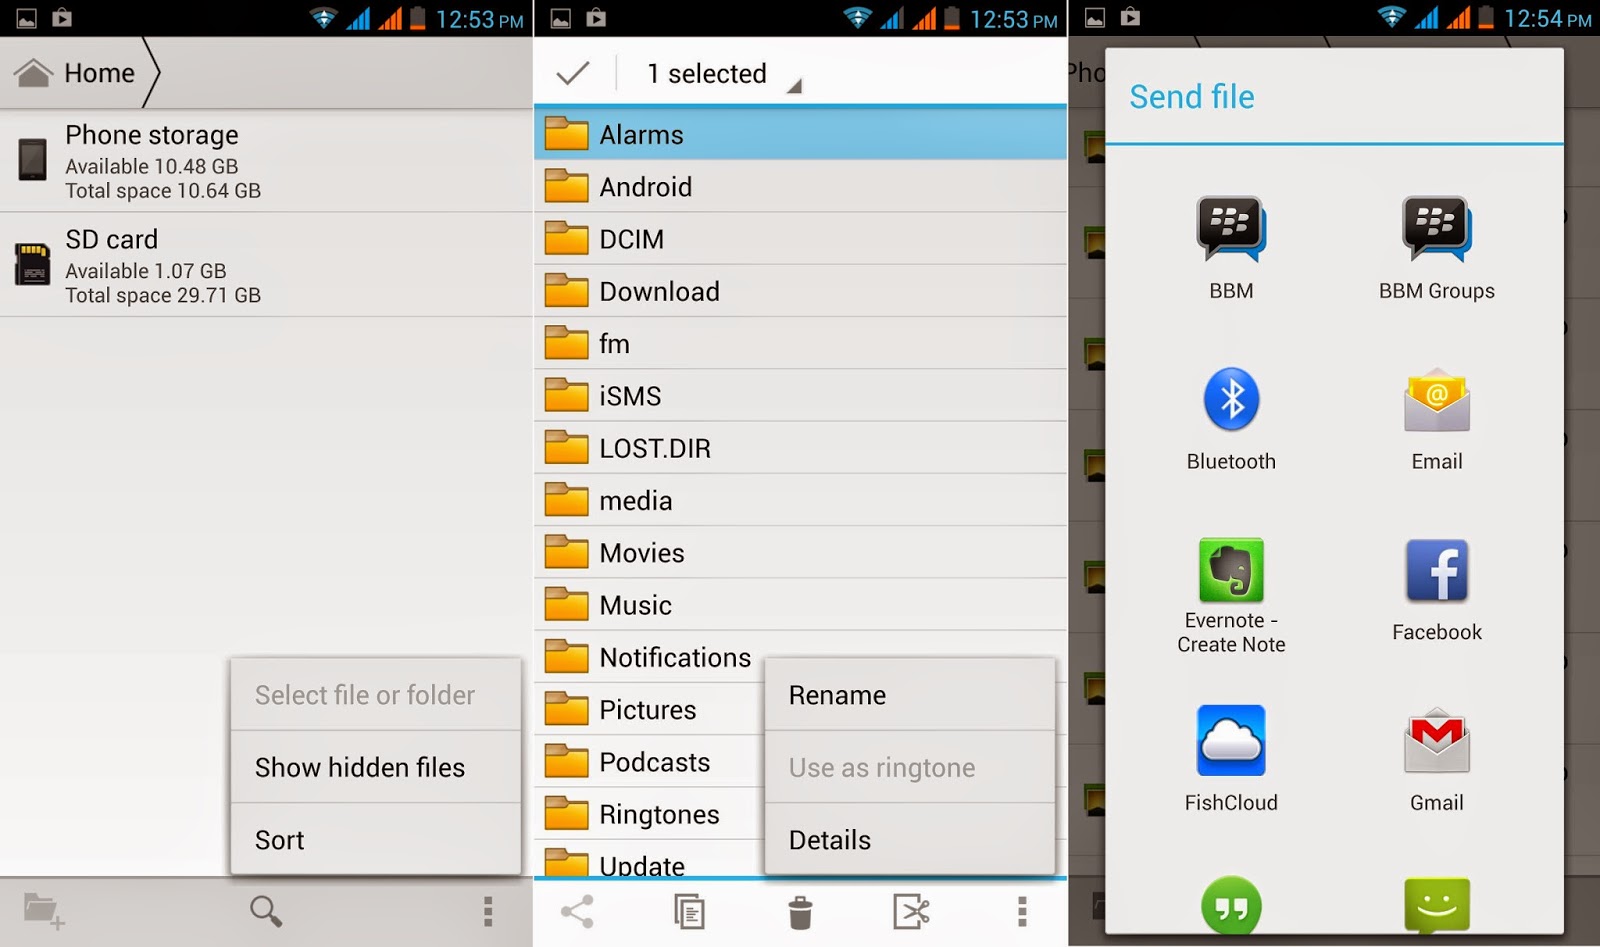 Kata Digital M1 Review, Colossal Inside and Out File Manager